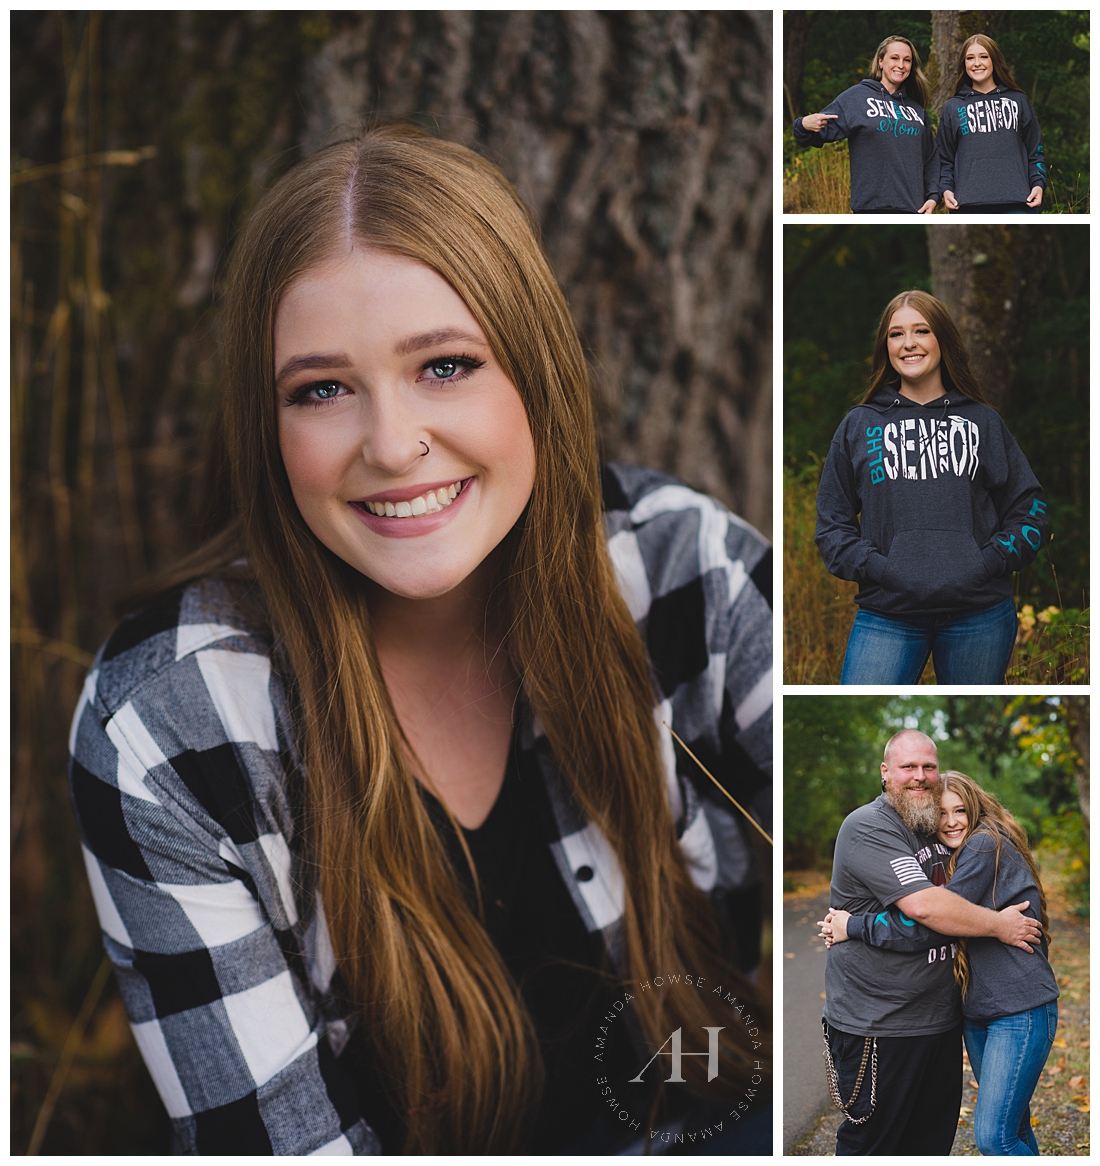 Senior Photo Outfit Ideas | Washington Senior Portraits with Buffalo Check Flannel and Skinny Jeans, Wearing School Spirit Wear for Senior Portraits, Bringing Your Parents To Your Senior Portrait Session | Photographed by the Best Tacoma Senior Portrait Photographer Amanda Howse